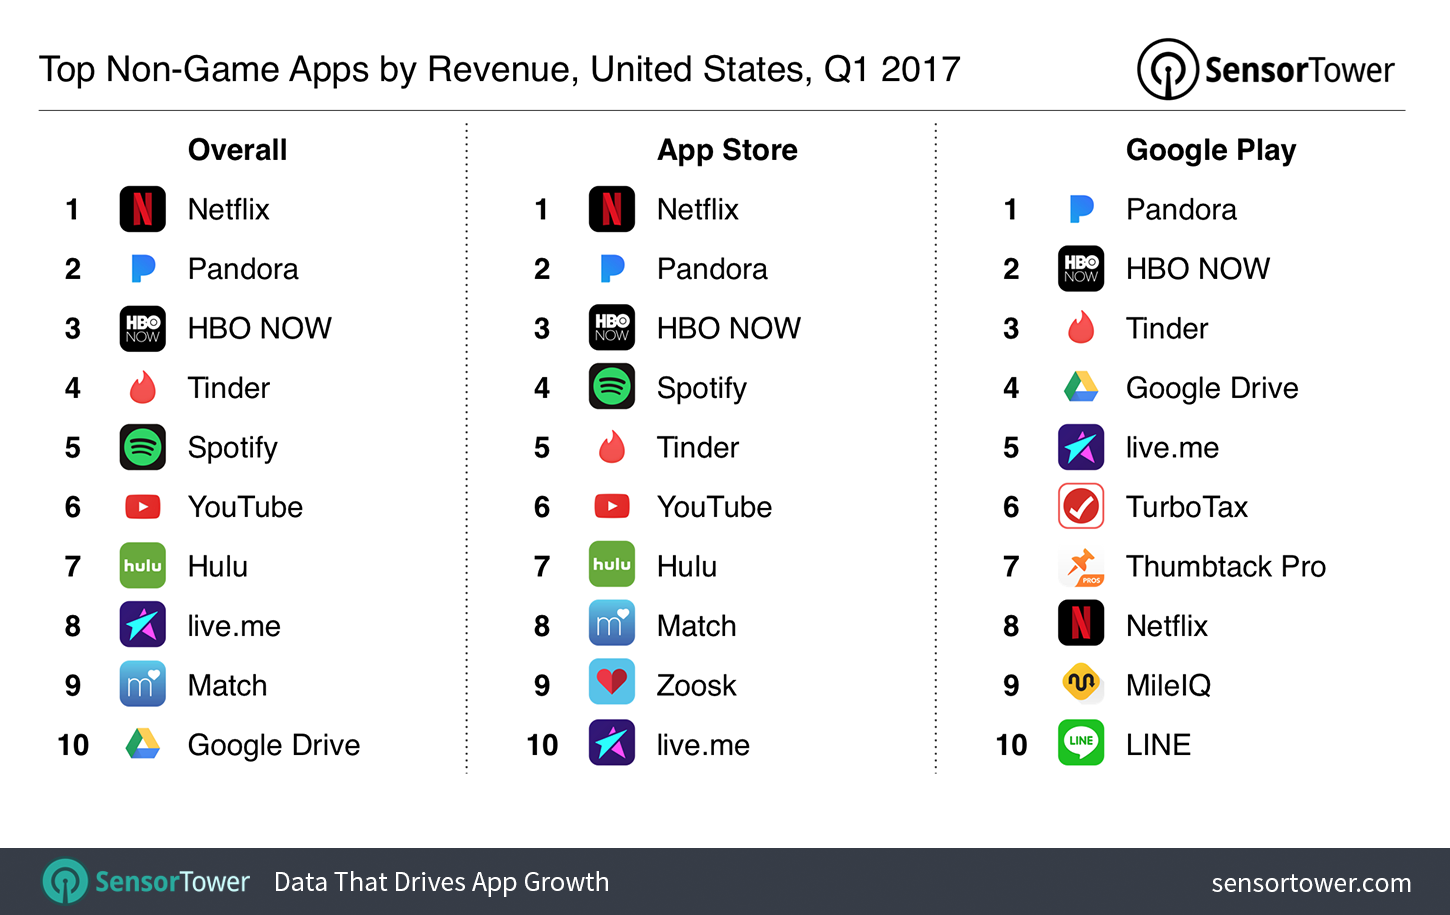 Q1 2017's Top Mobile Apps by United States Revenue